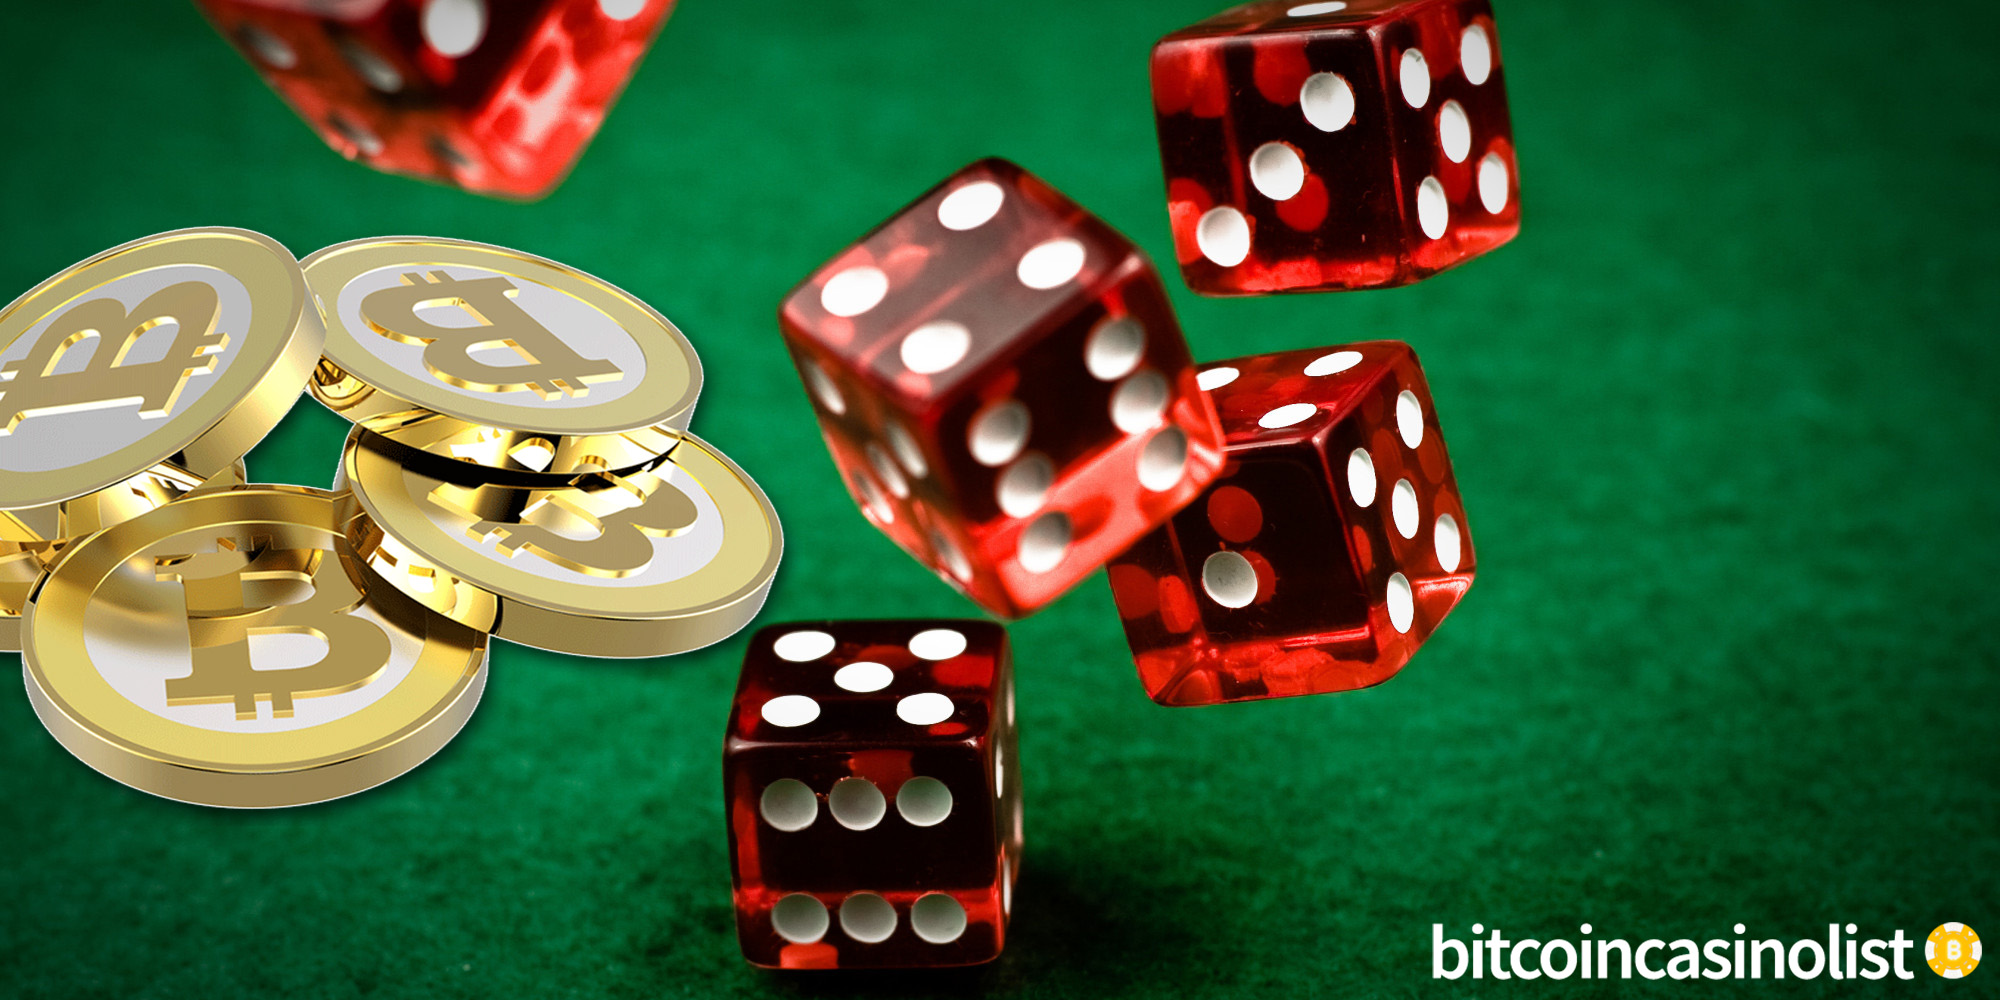 BITCOIN & CRYPTOCURRENCY GAMBLING ENTERPRISES: ADVANTAGES OF MAKING USE OF DIGITAL CURRENCY